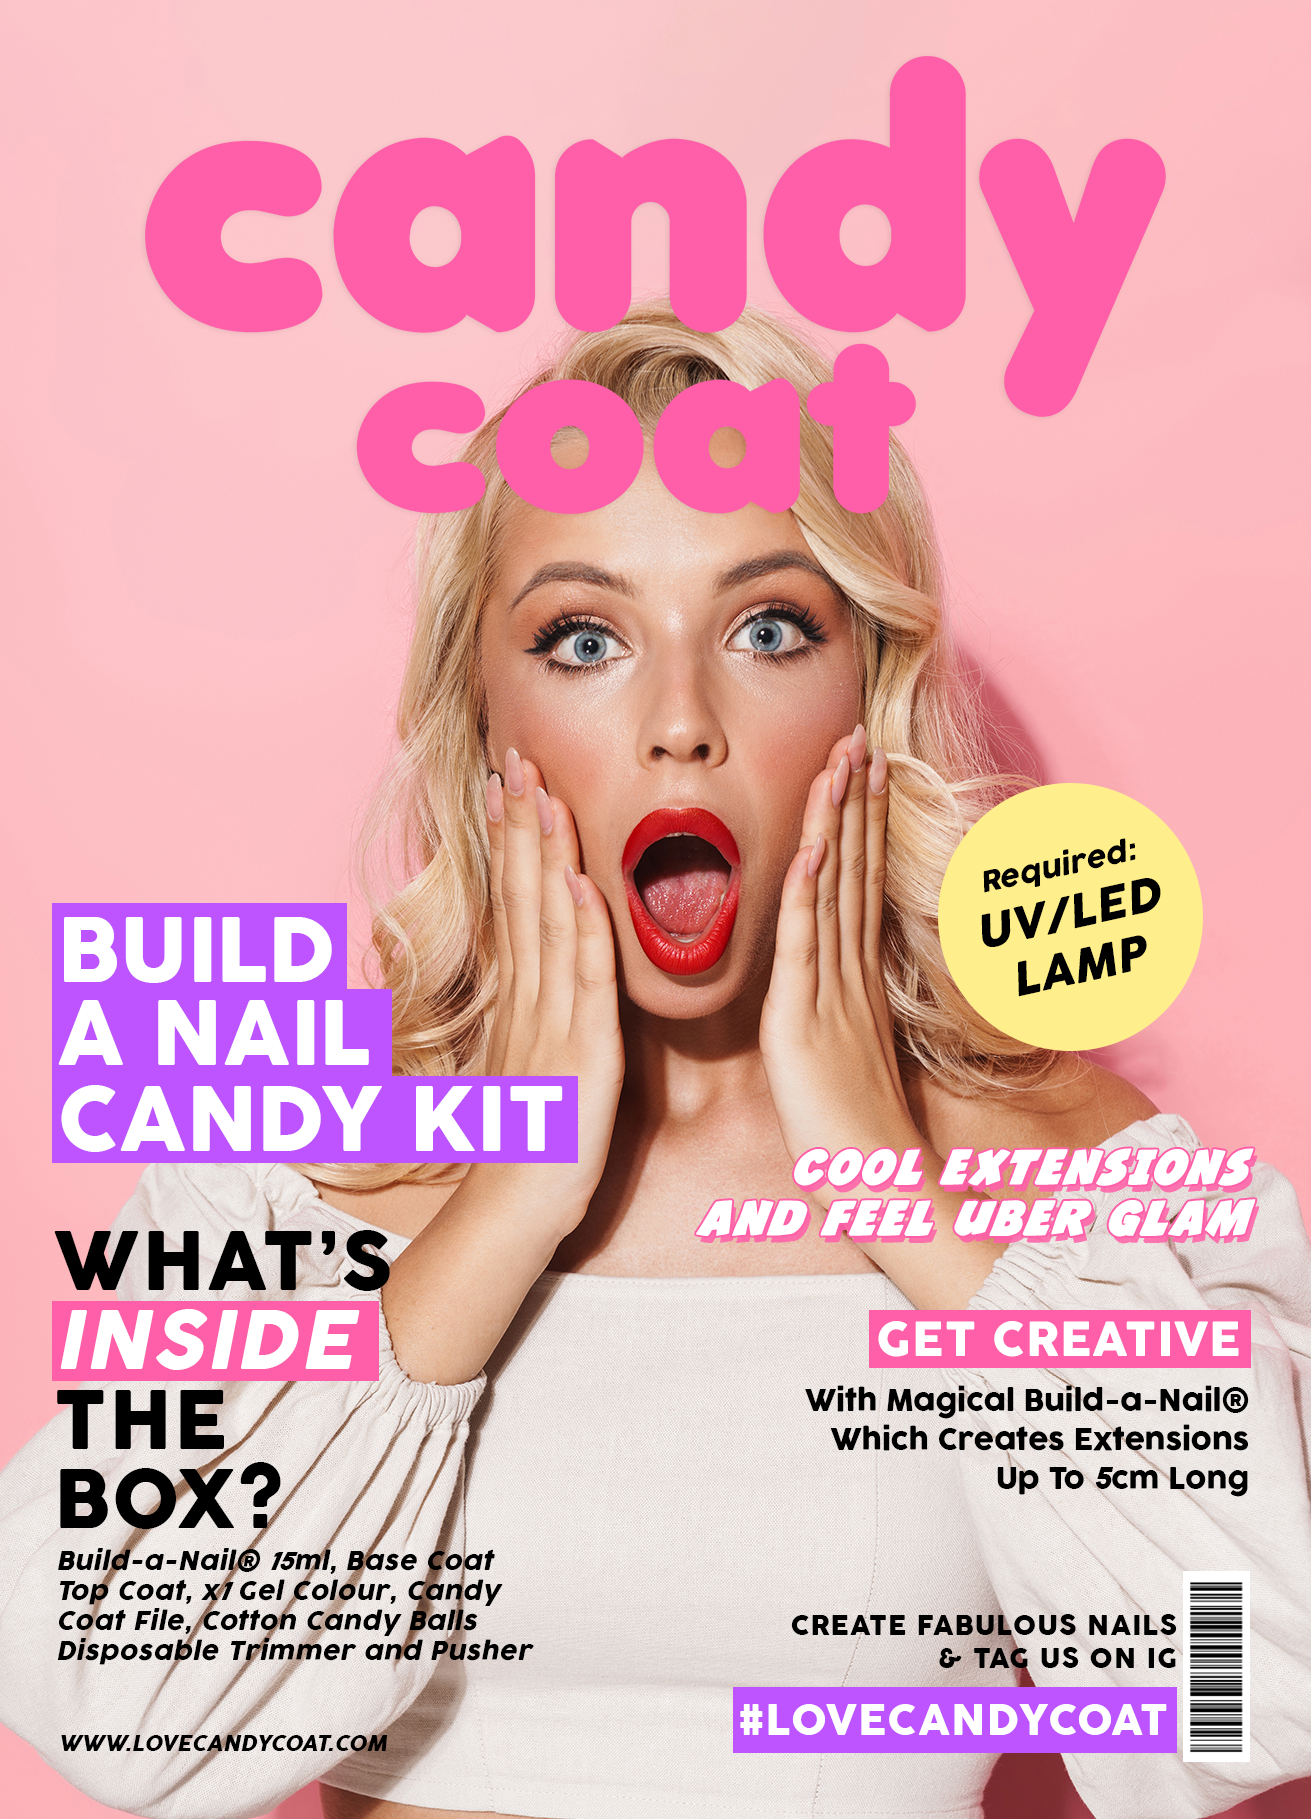 Candy Coat - Build-a-Nail® Candy Kit